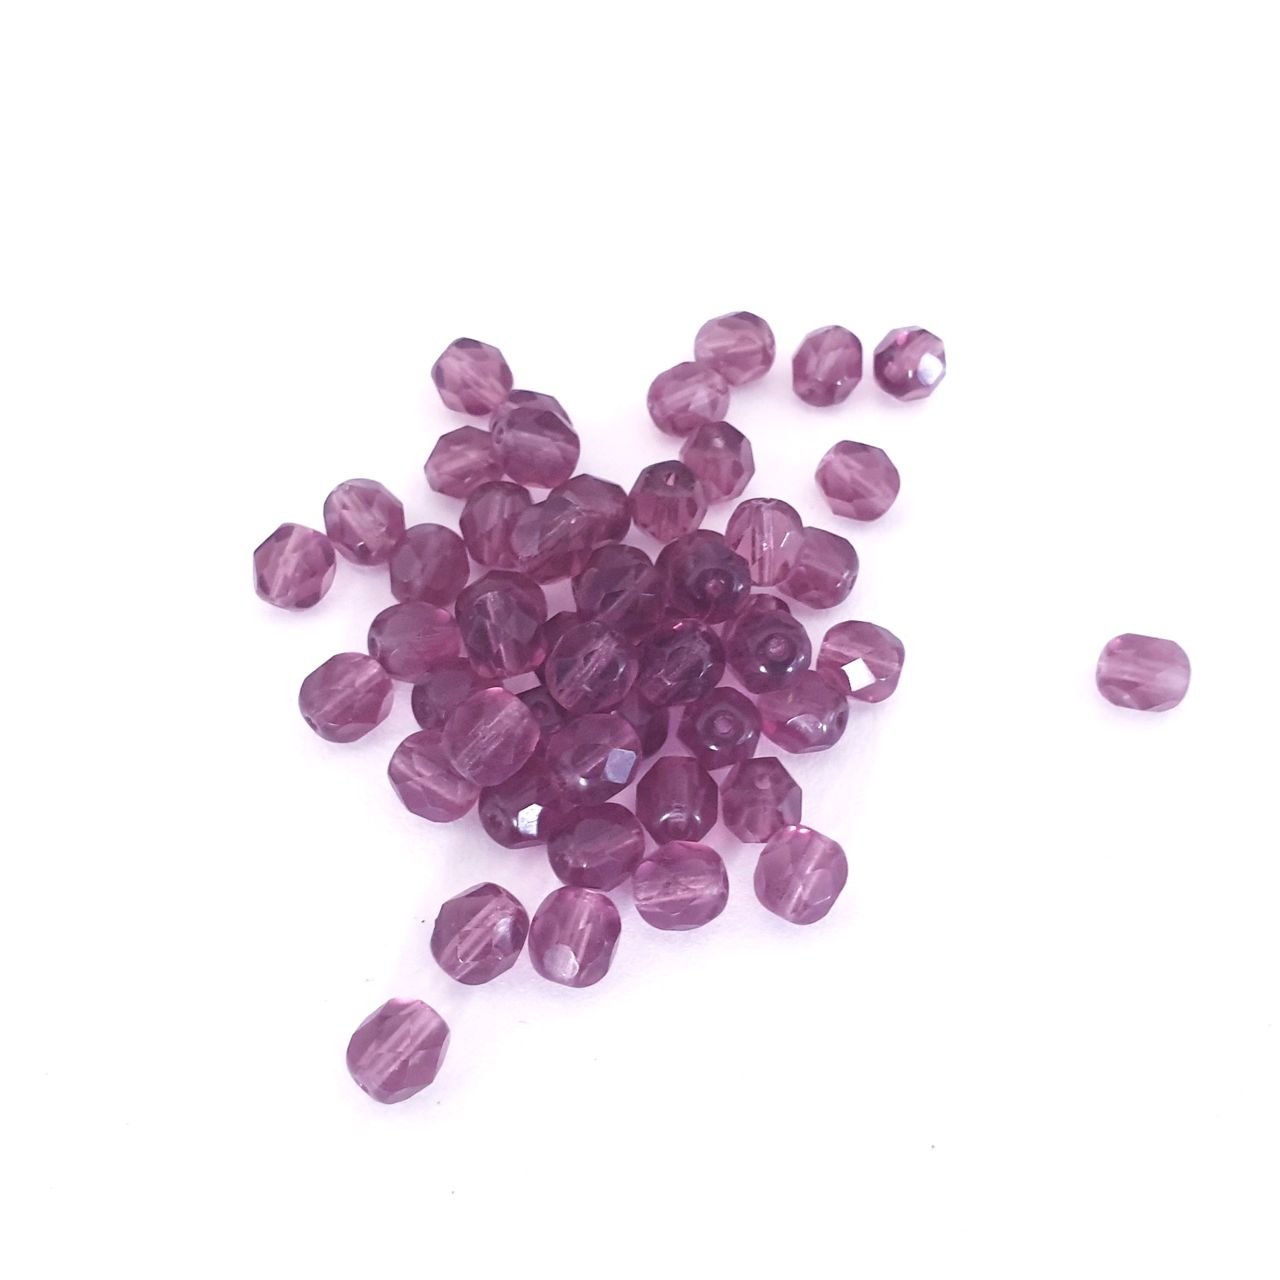 6mm Amethyst Transparent Fire Polished Bead